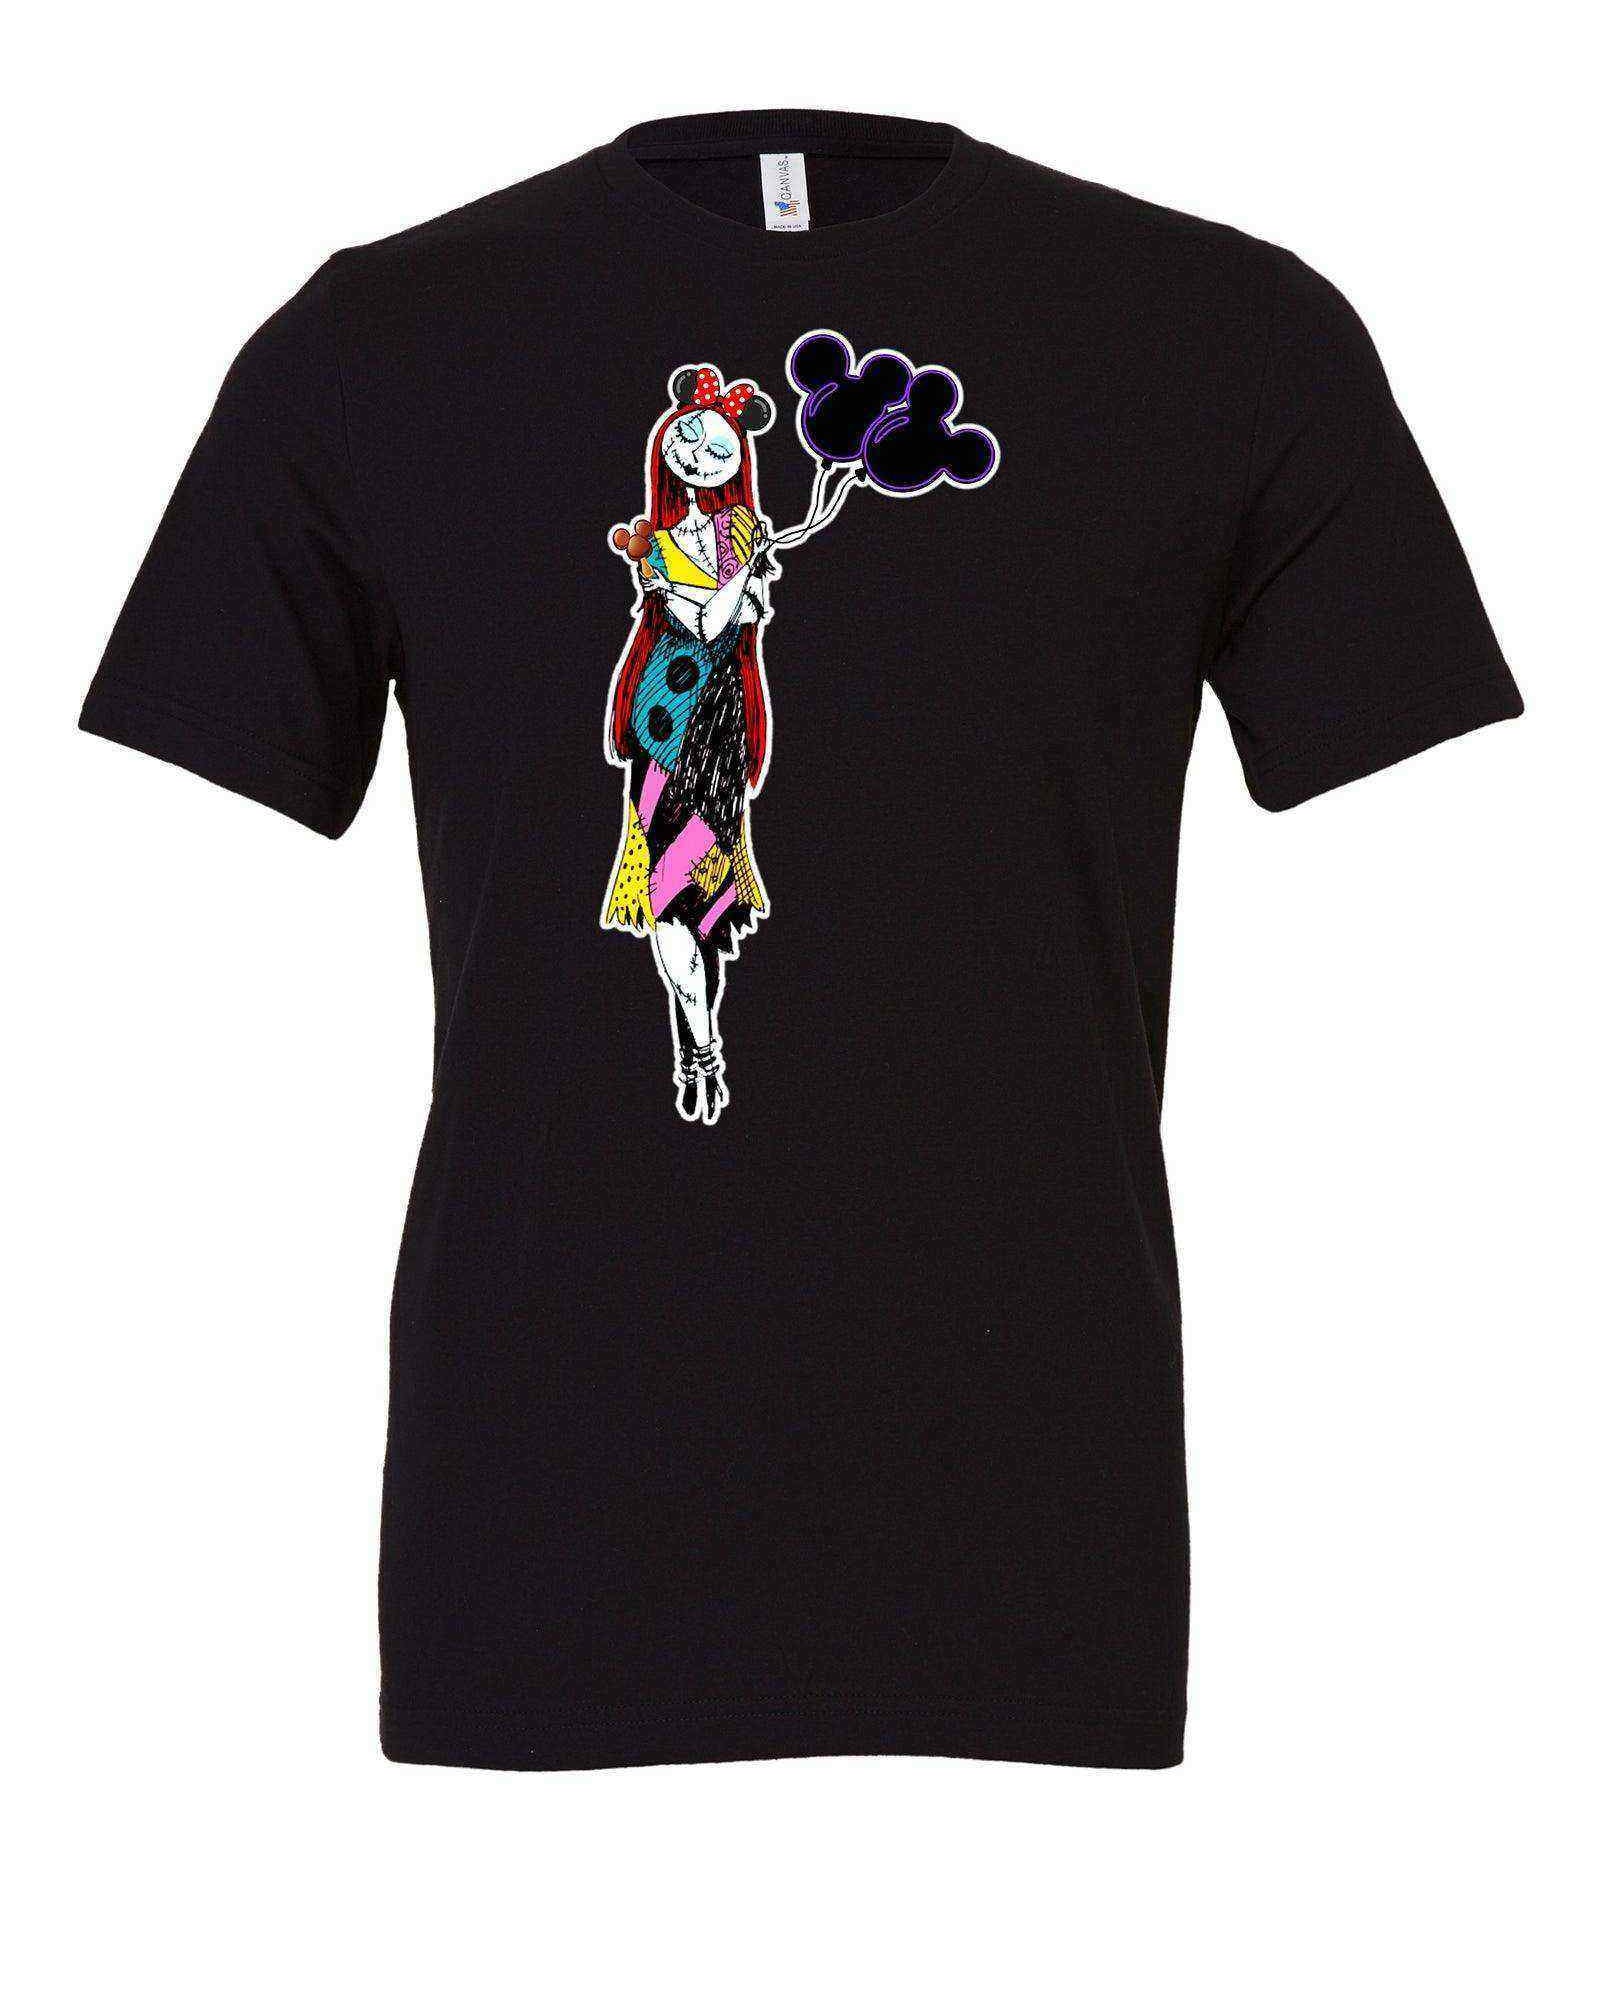 Park Hopping Sally Shirt | Nightmare Before Christmas - Dylan's Tees